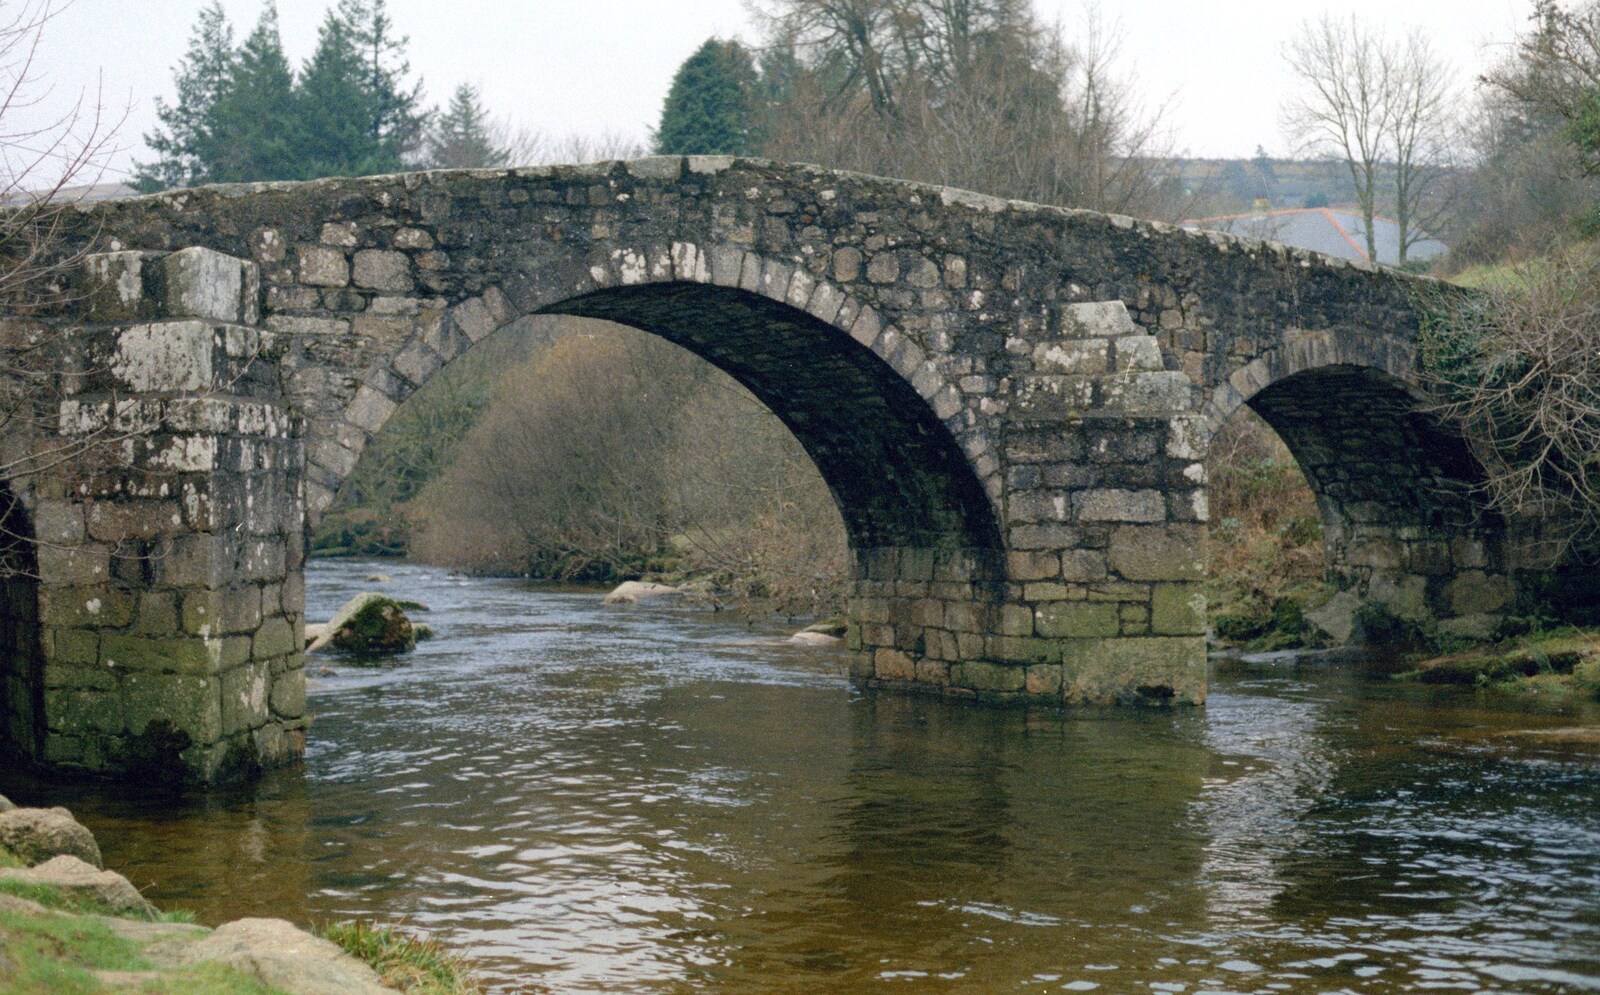 The bridge at Badger's Holt from Uni: A Trip to Venford Resevoir, Dartmoor, Devon - 18th January 1987